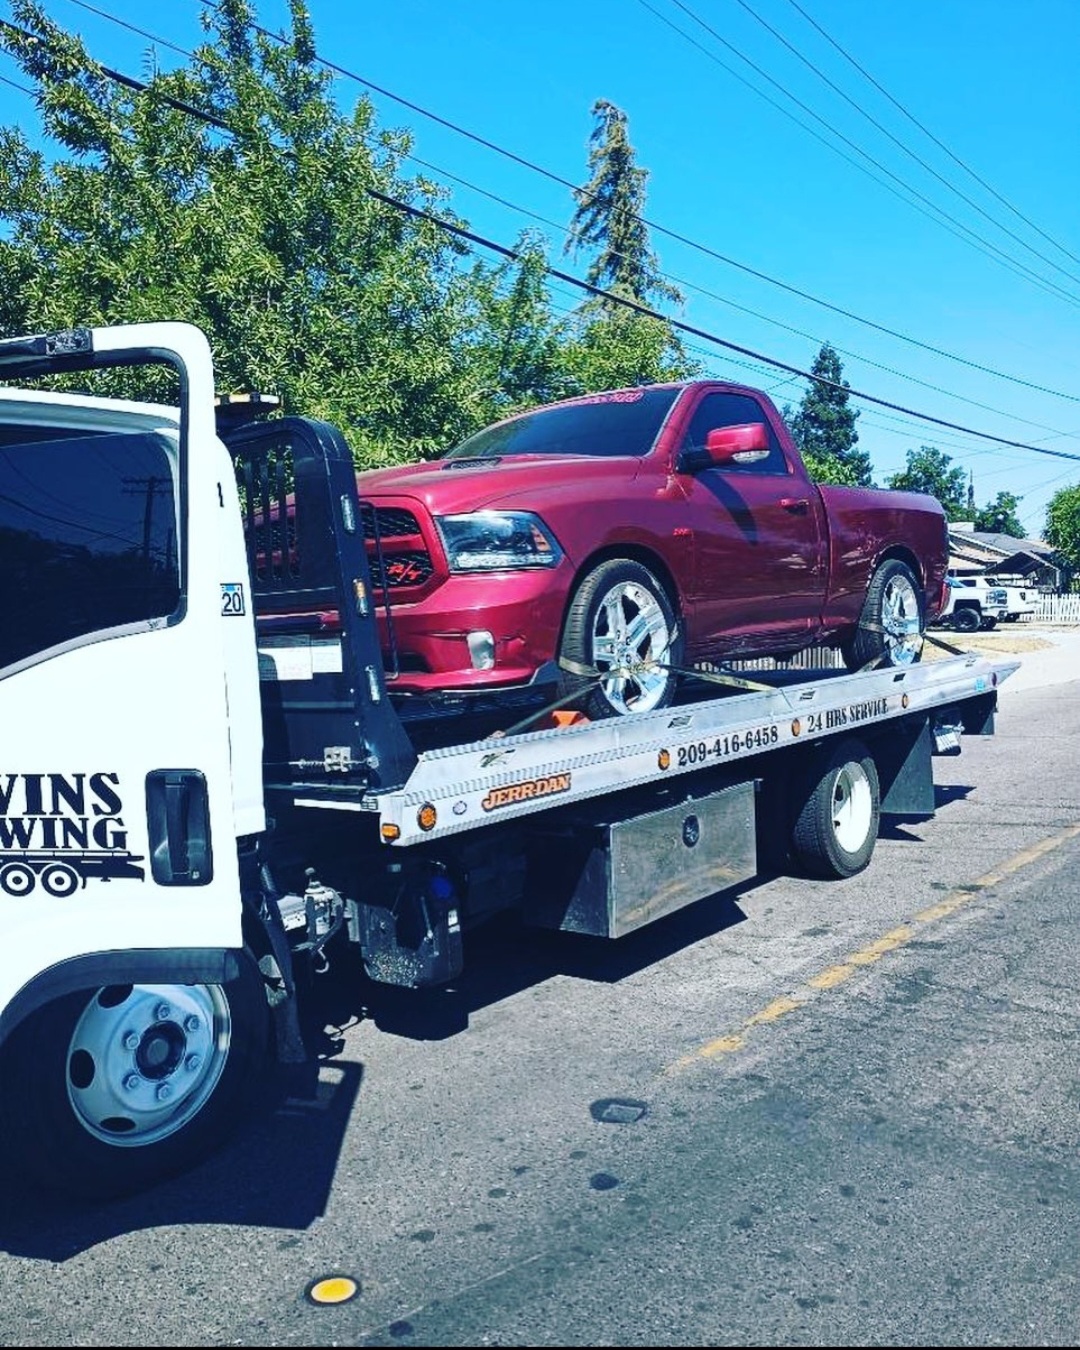 Twins towing